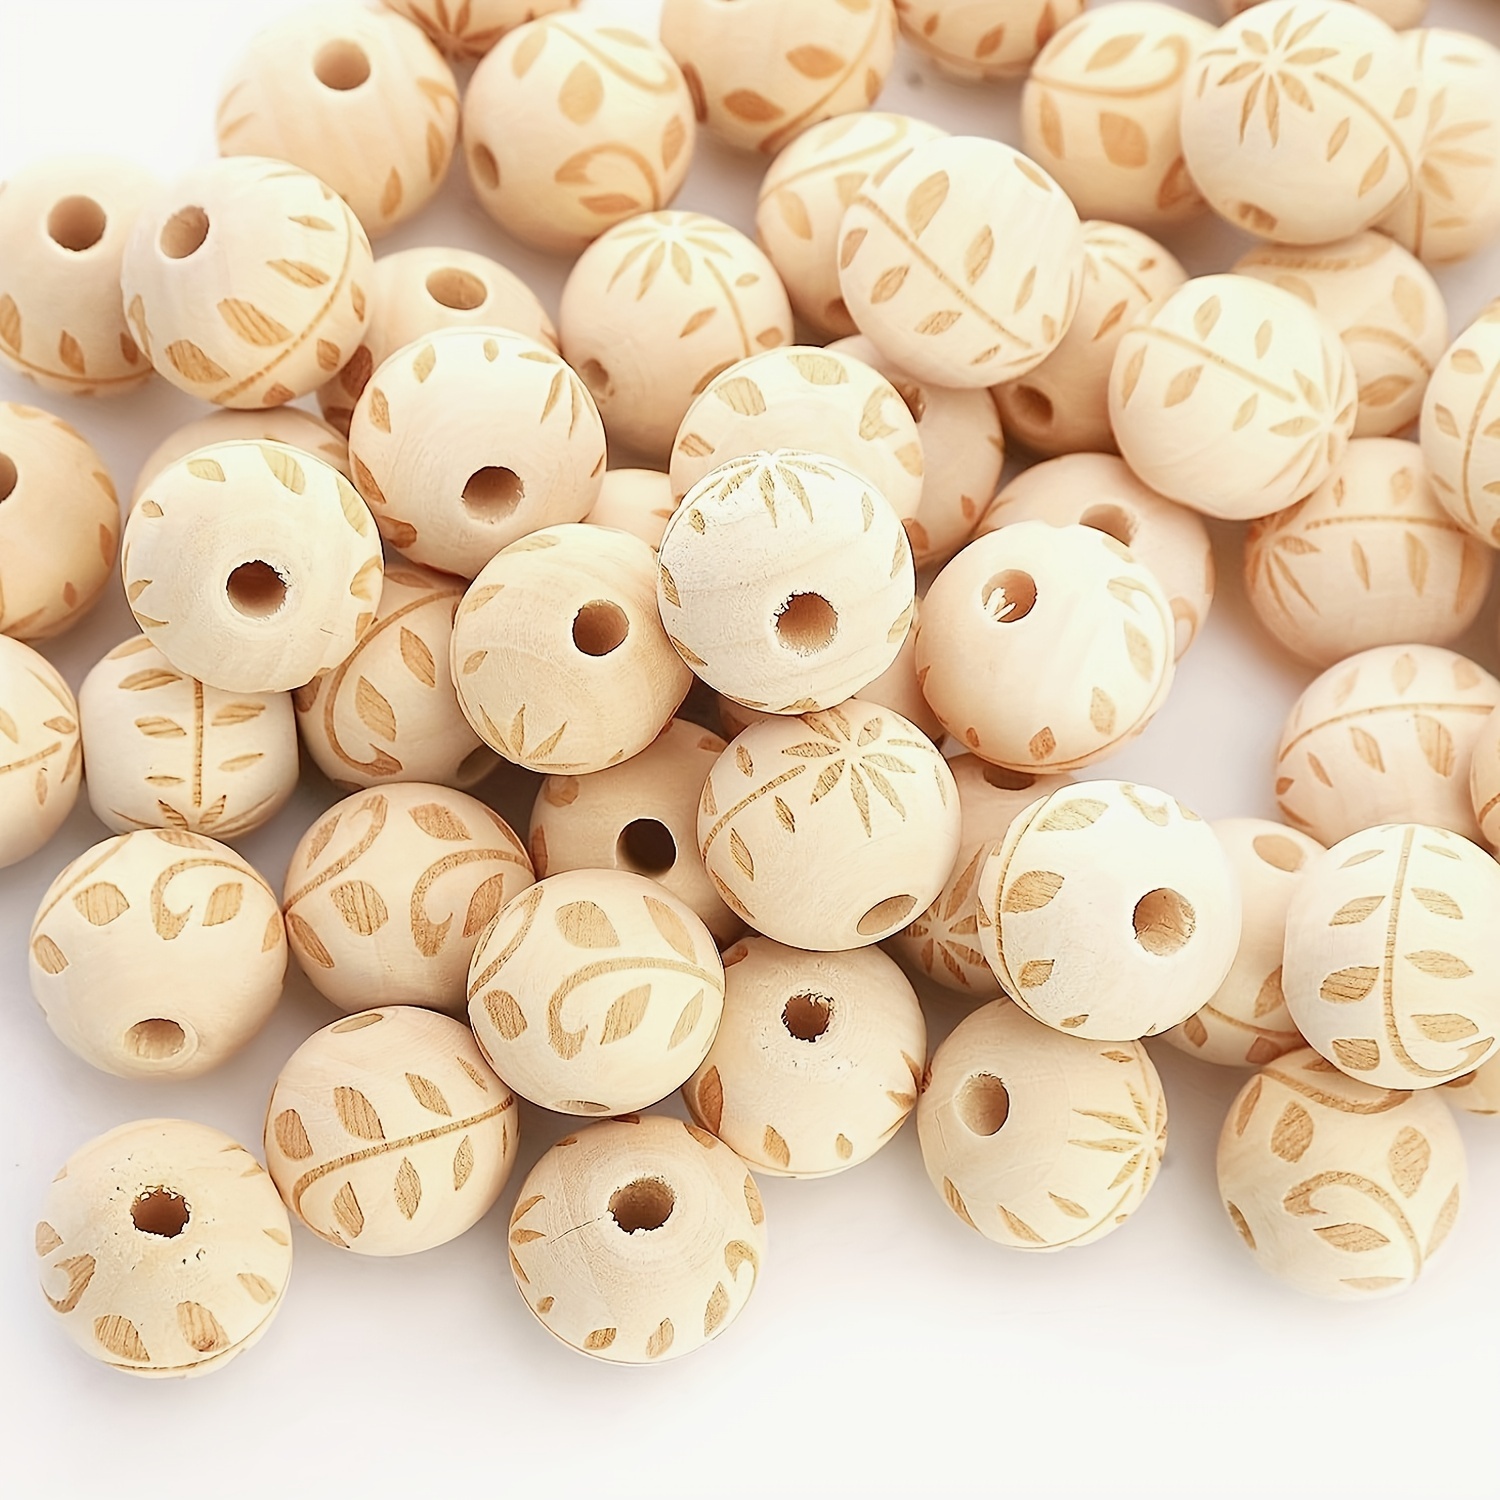 Vicenpal 150 Pieces Wood Beads for Crafts Wooden Beads for Jewelry Making  Round Colored Bead for Bracelet Ghost Beads Farmhouse Spacer Beads with